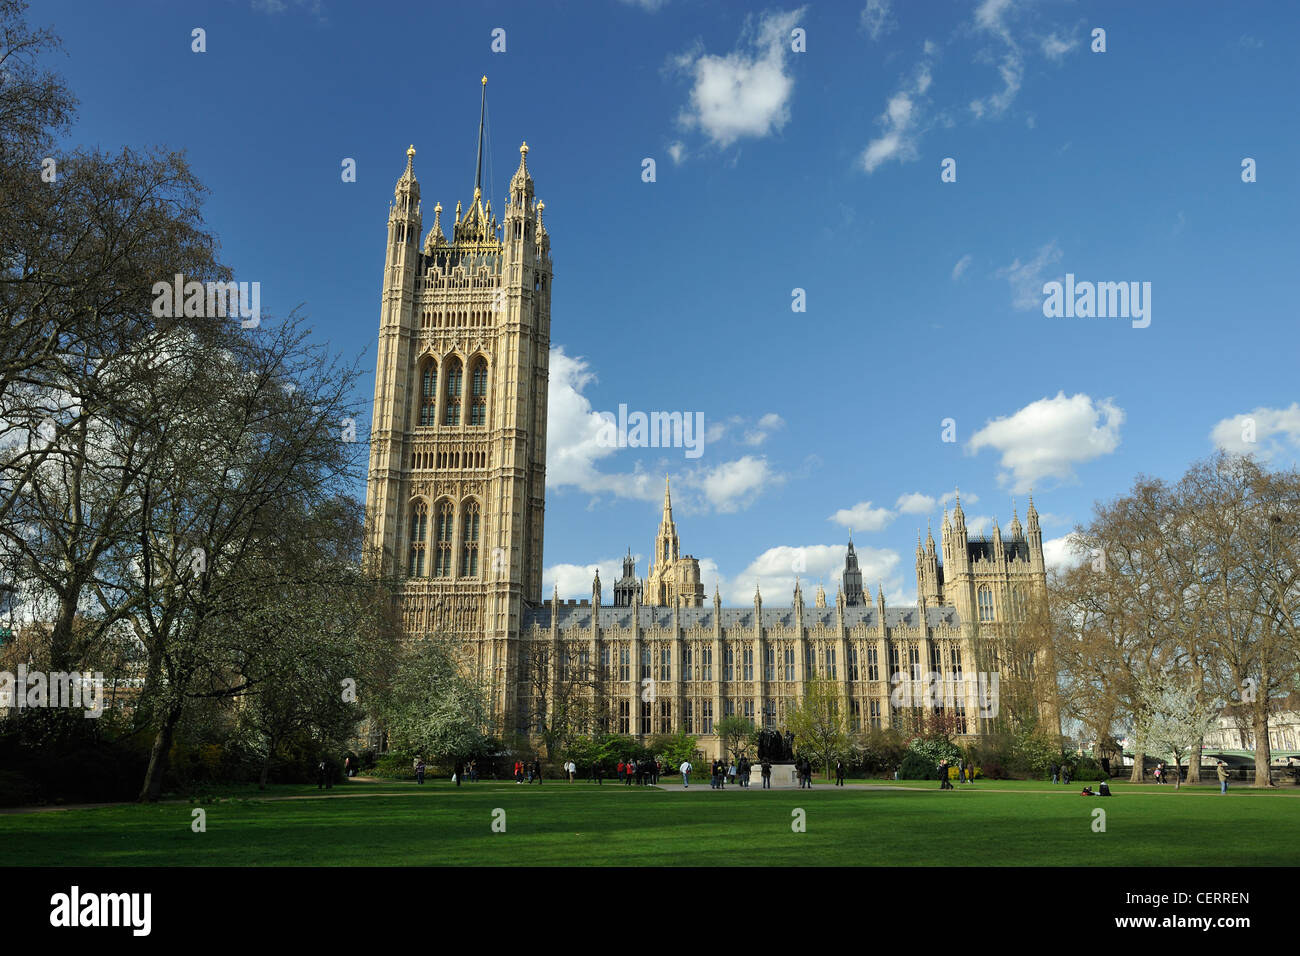 The Palace of Westminster or Houses of Parliament in Westminster. Stock Photo